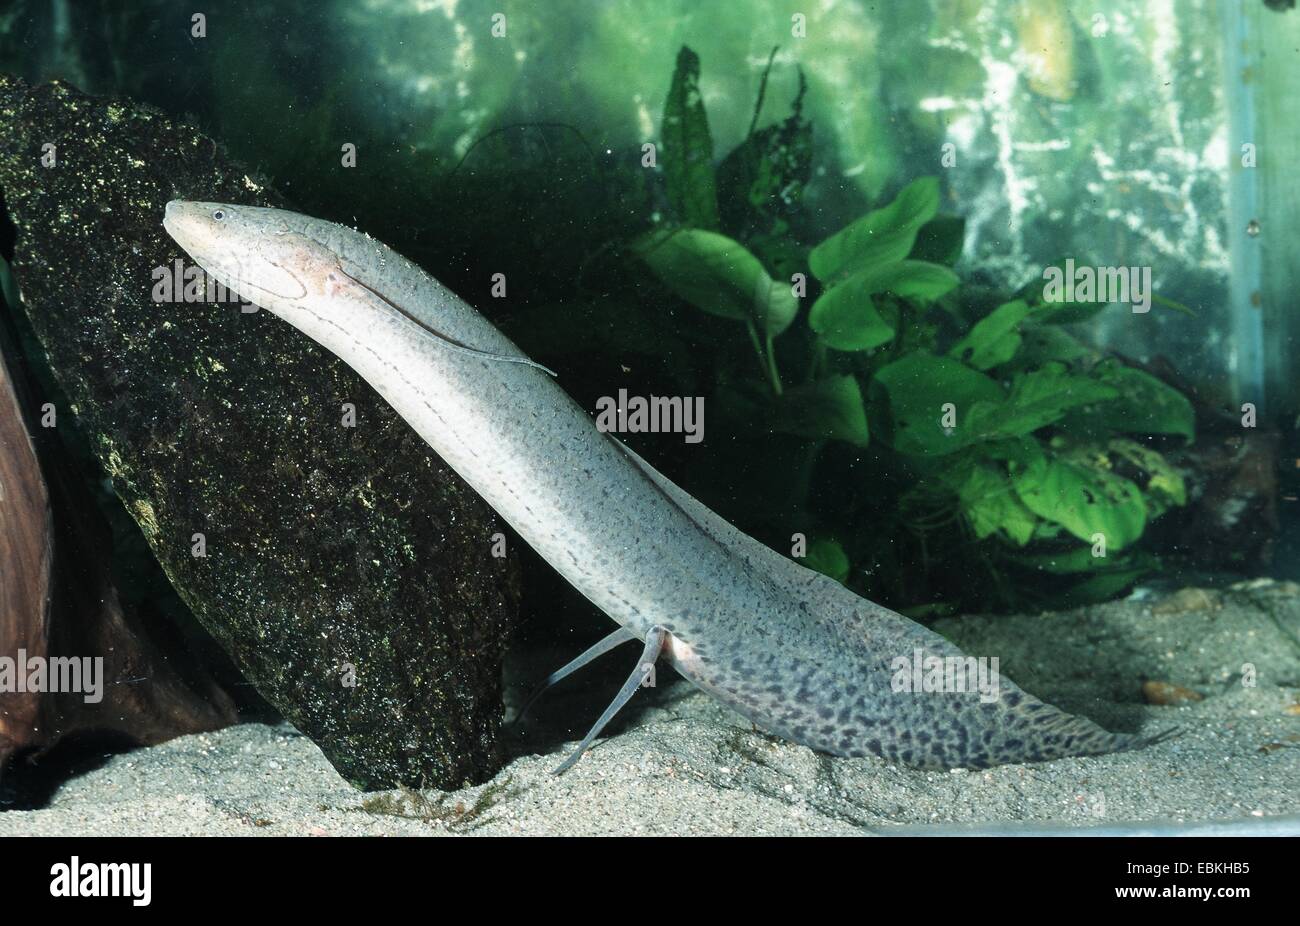 African lungfish (Protopterus cf. dolloi), on the ground Stock Photo